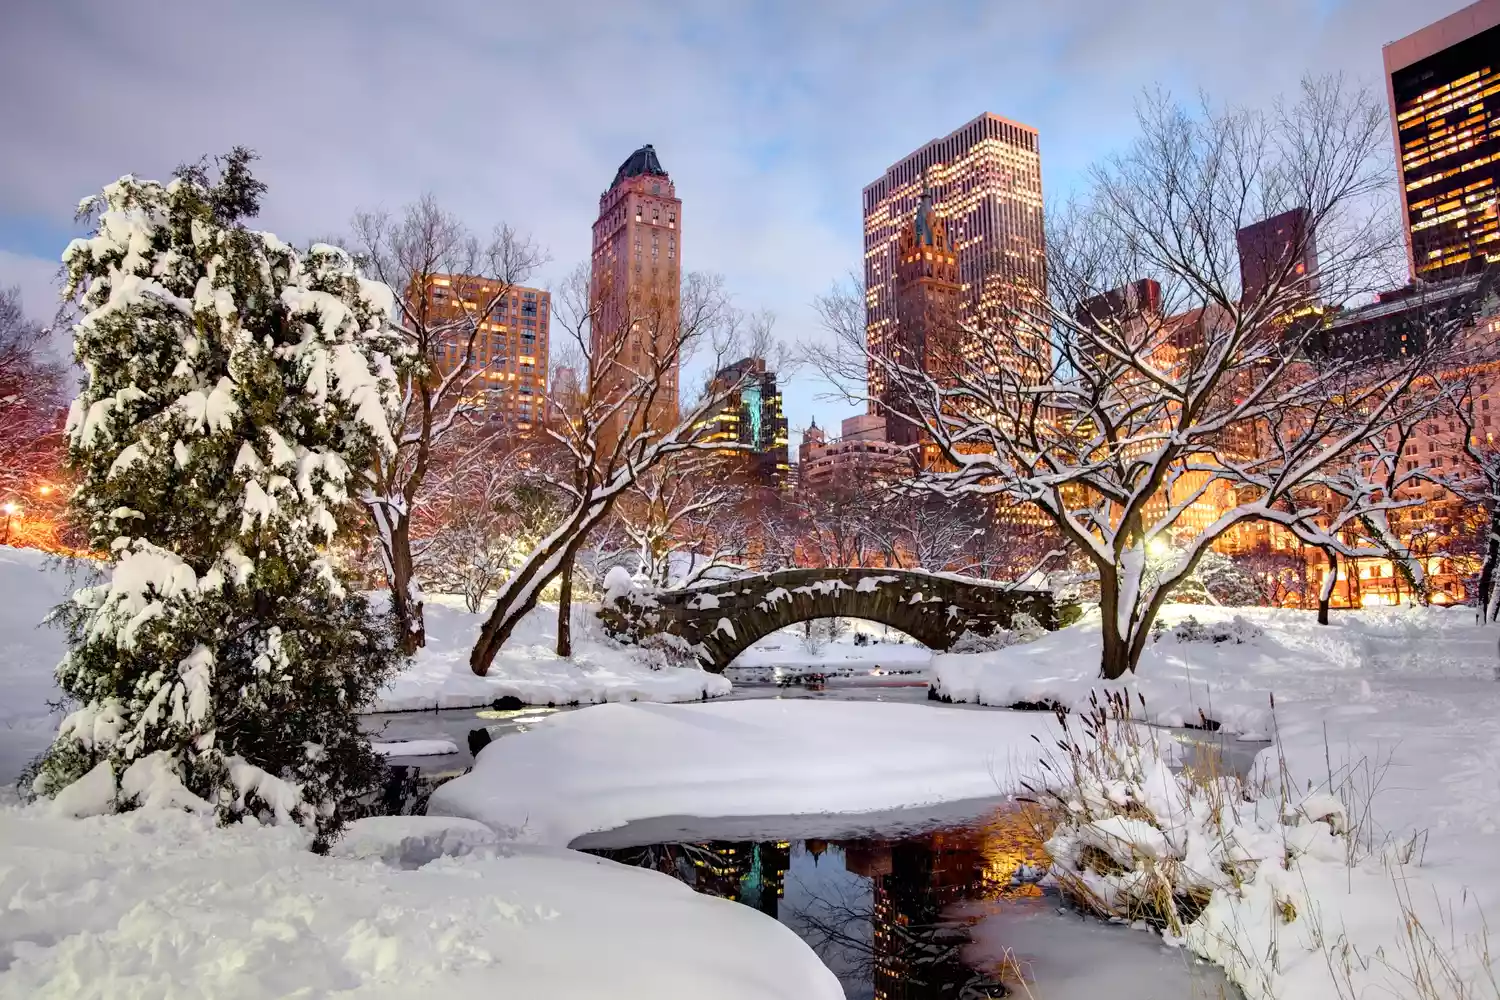 The Top 10 Winter Destinations on the East Coast